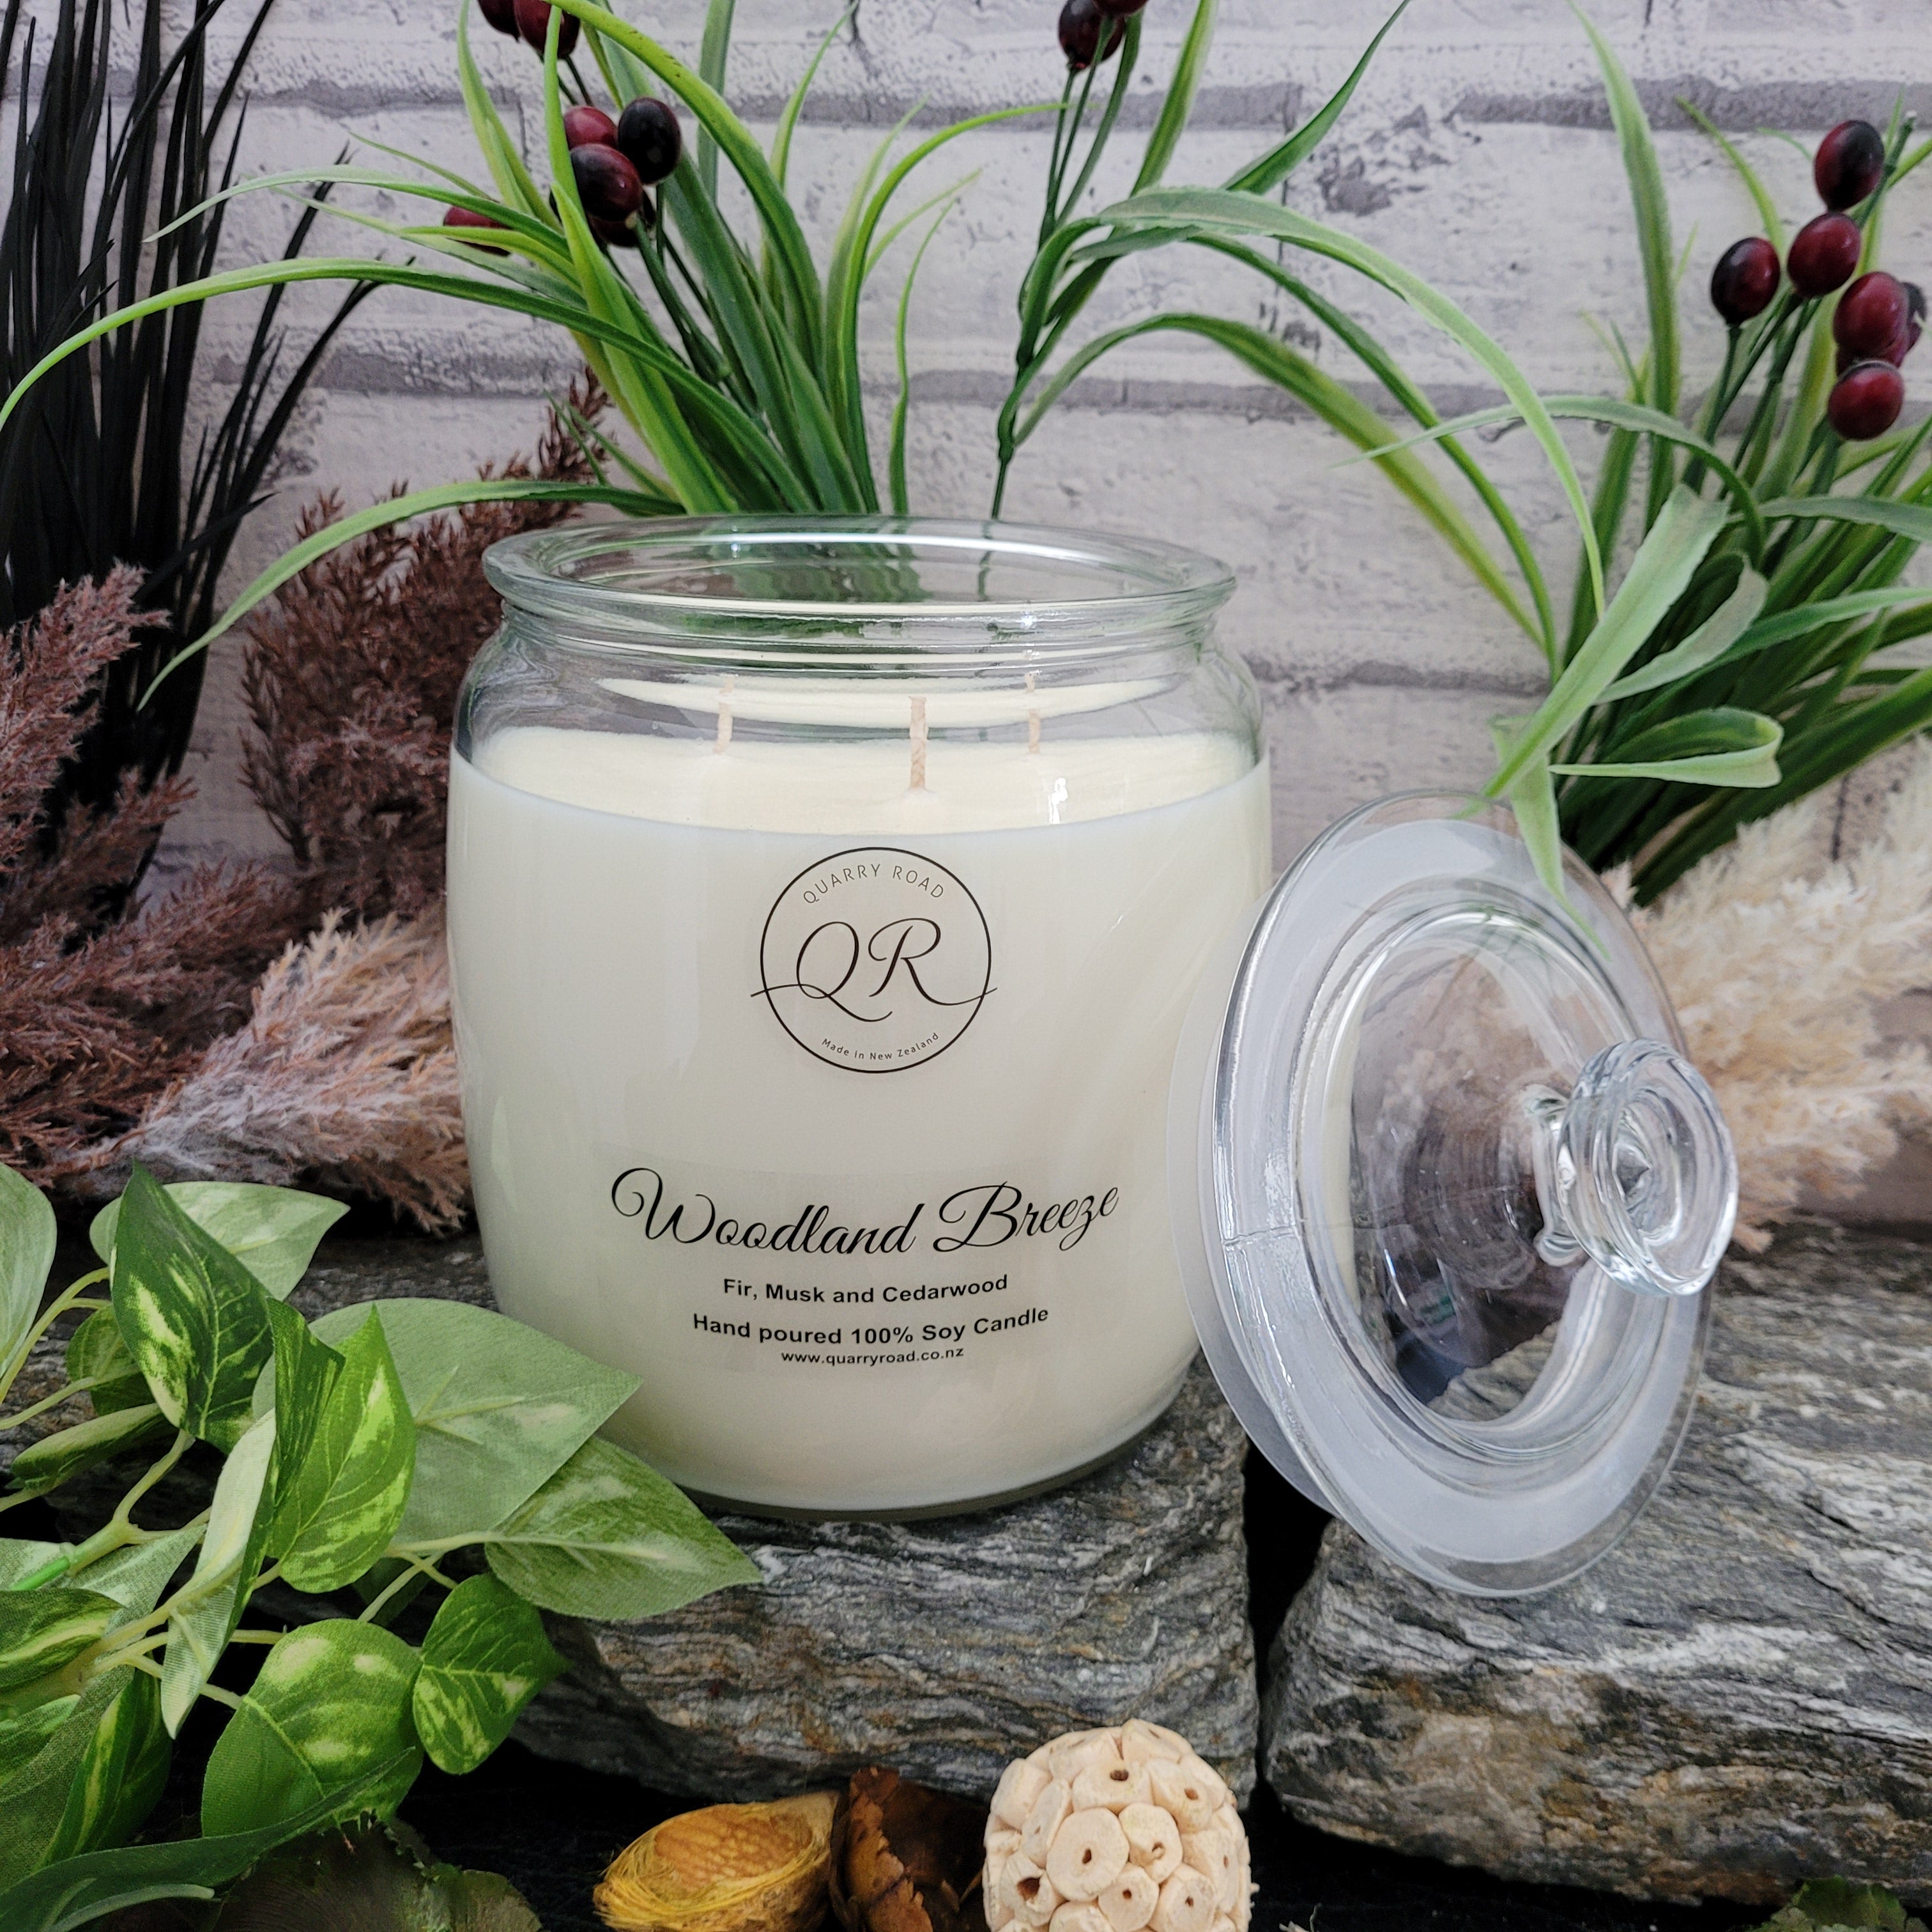 Woodland Breeze candle made by Quarry Road.